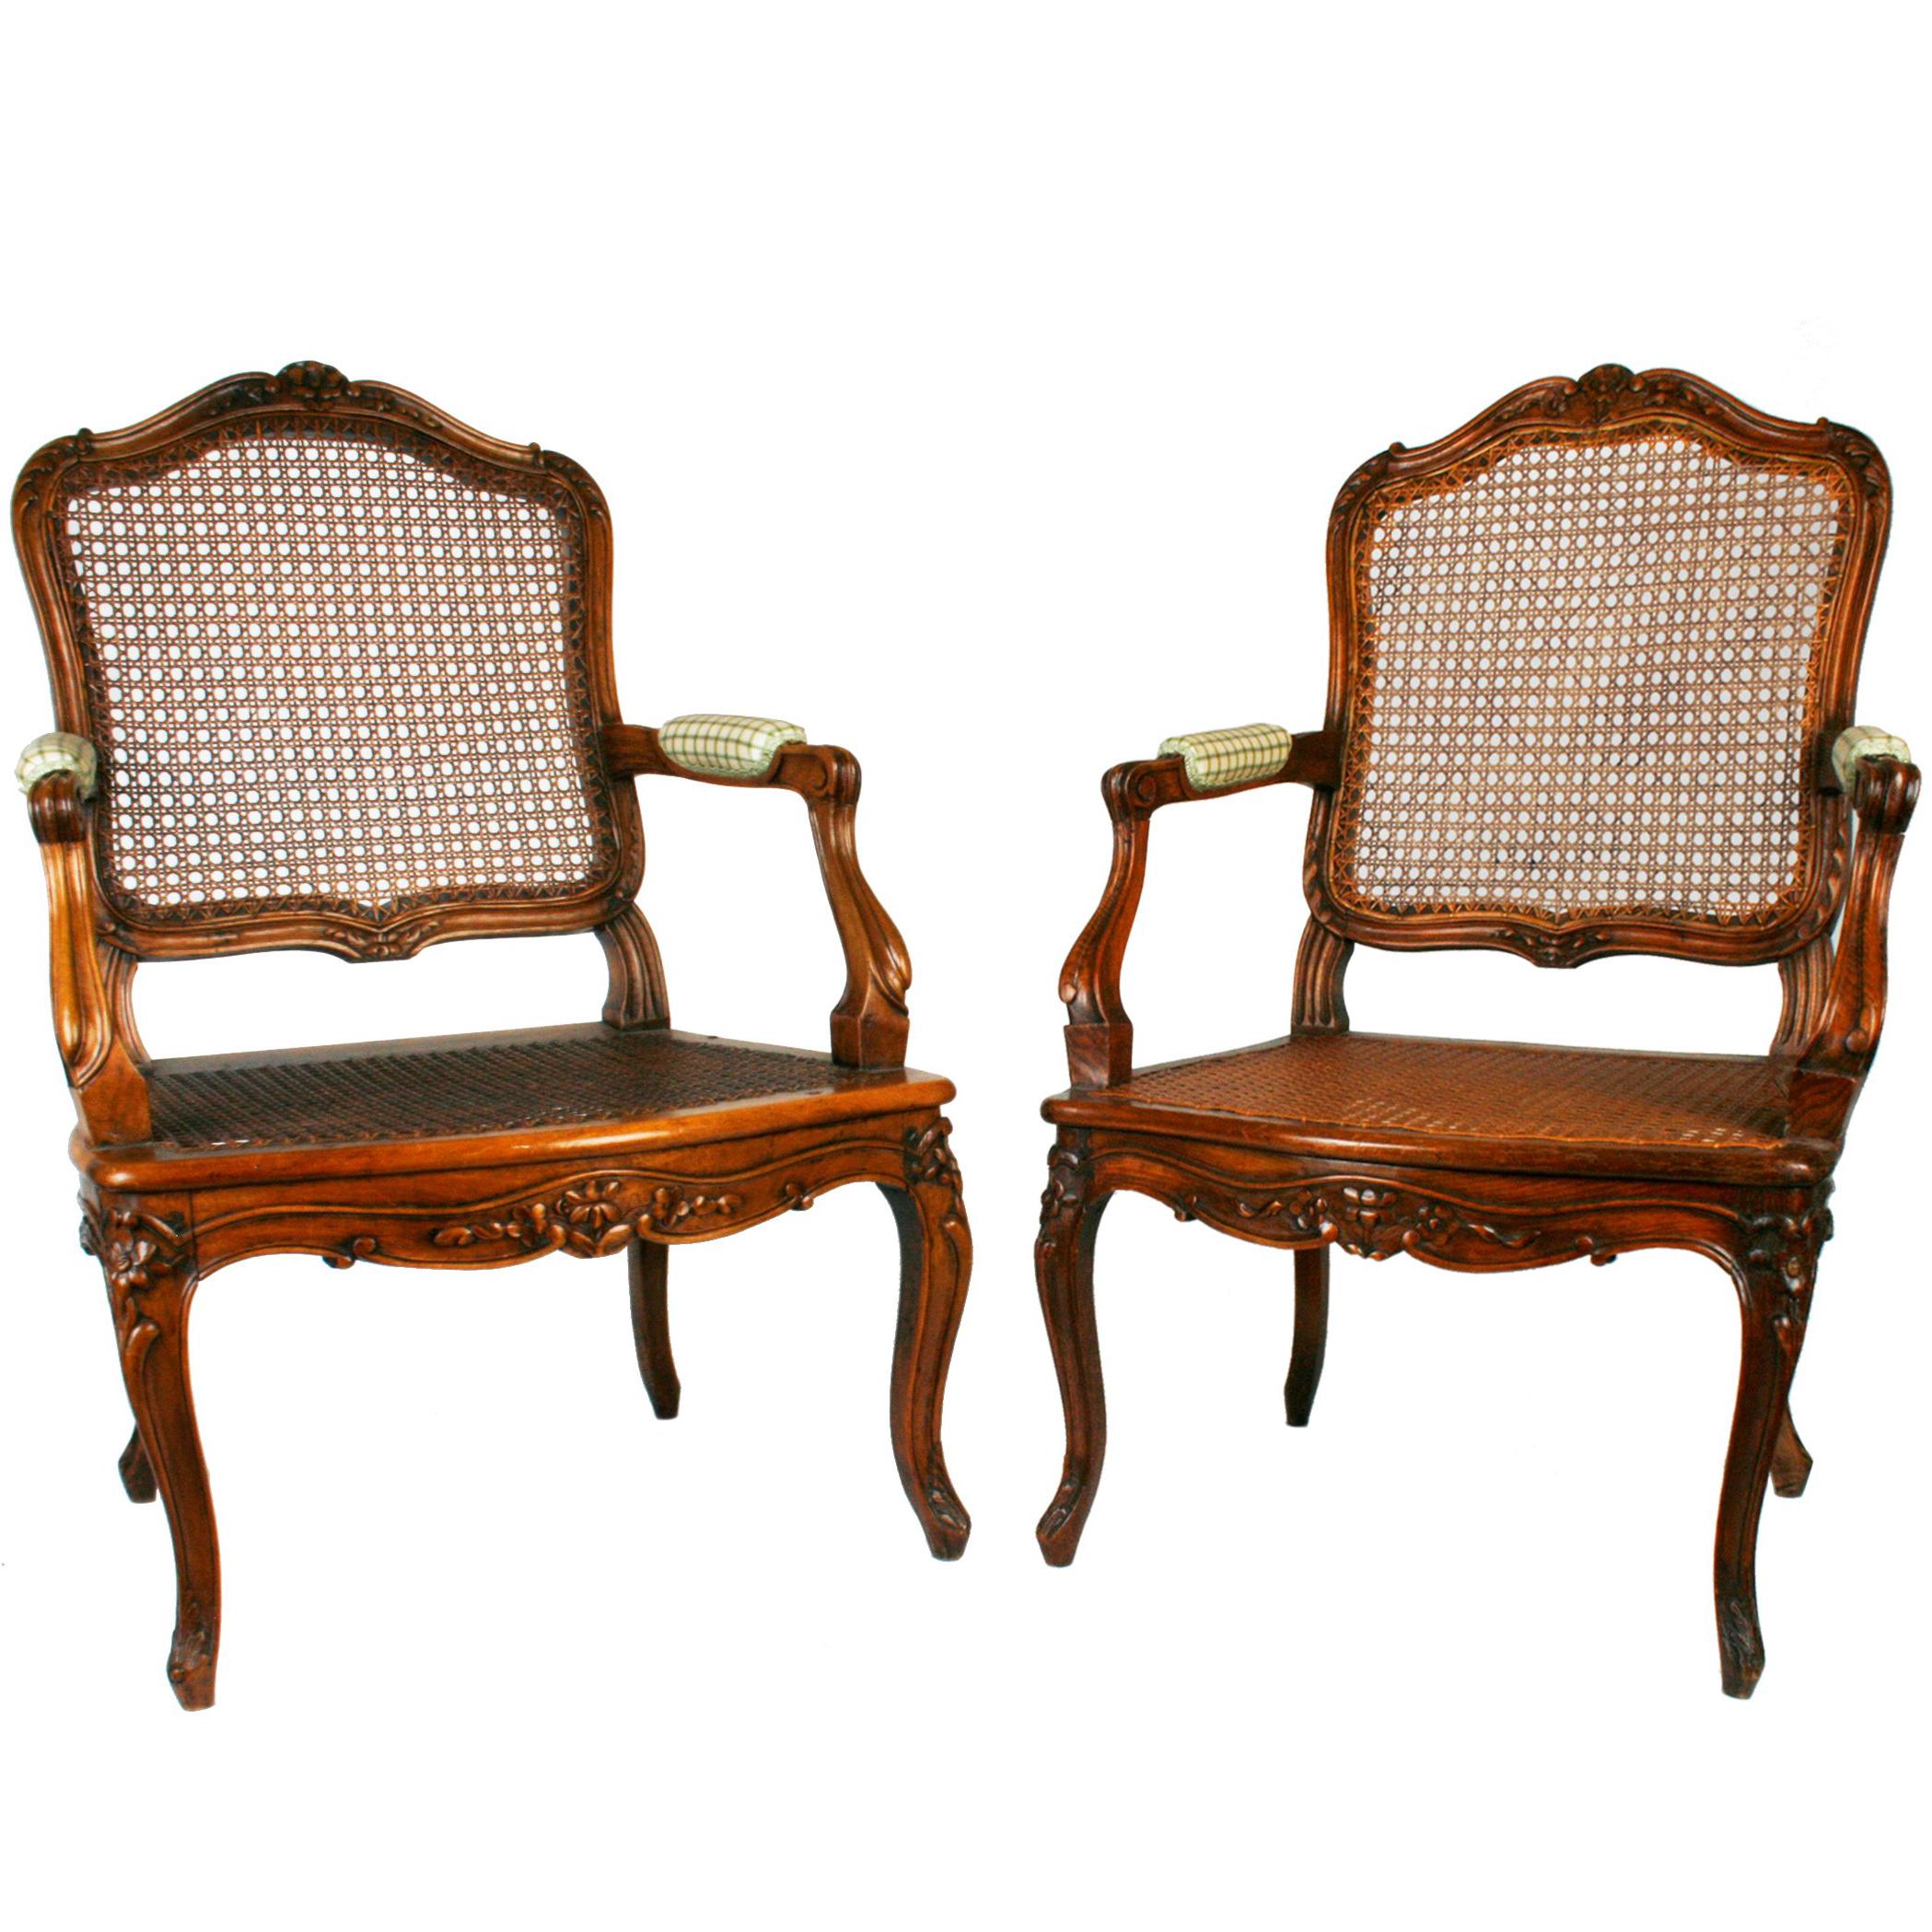 Assembled Pair of Walnut Louis XV Style Armchairs, 19th Century